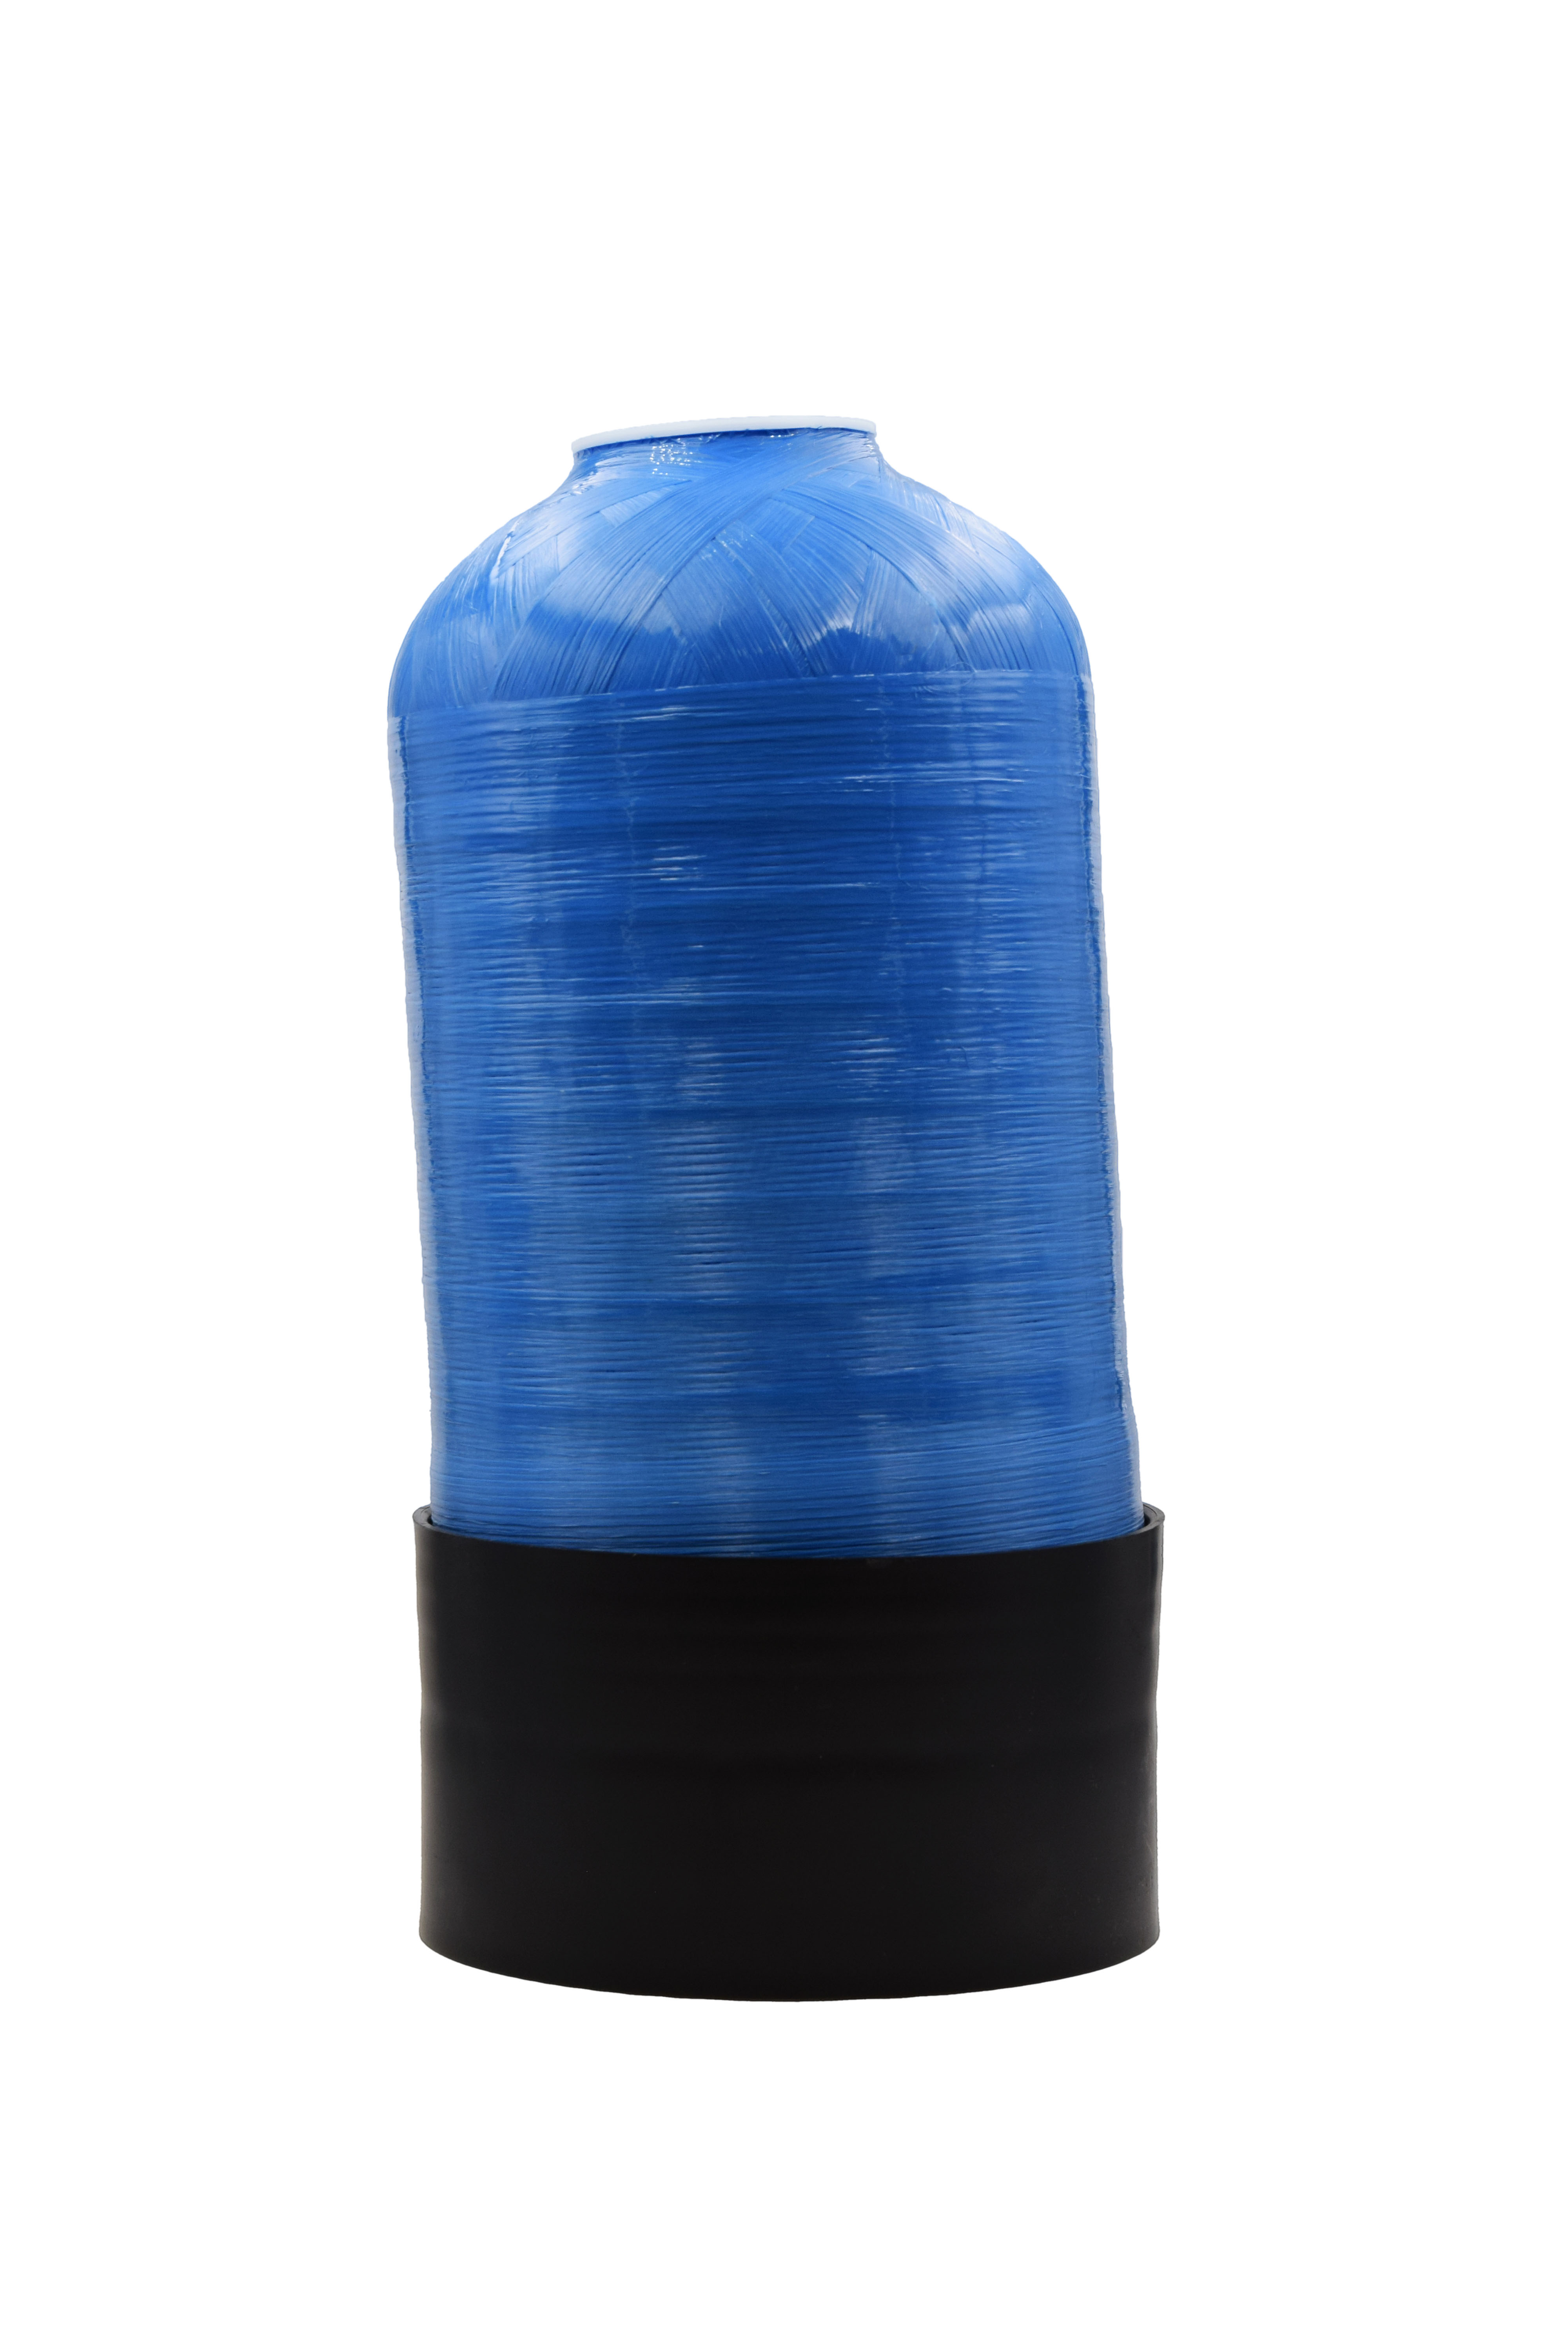 25 Liter Plastic Mixed Bed Demineralization Cartridge Filled with Premium Resin